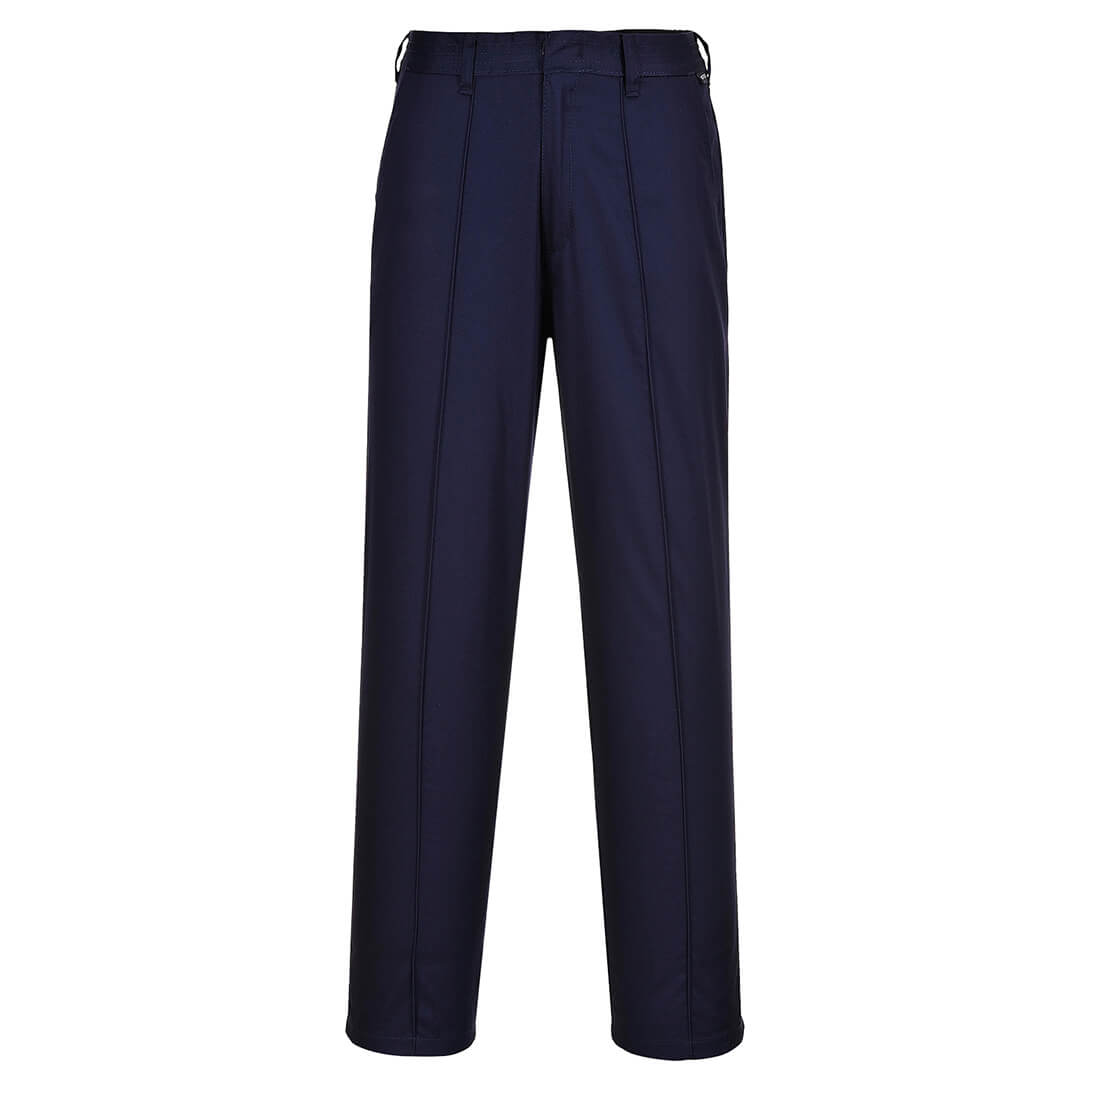 Image of Portwest LW97 ladies Elasticated Trousers Navy Blue XS 31"